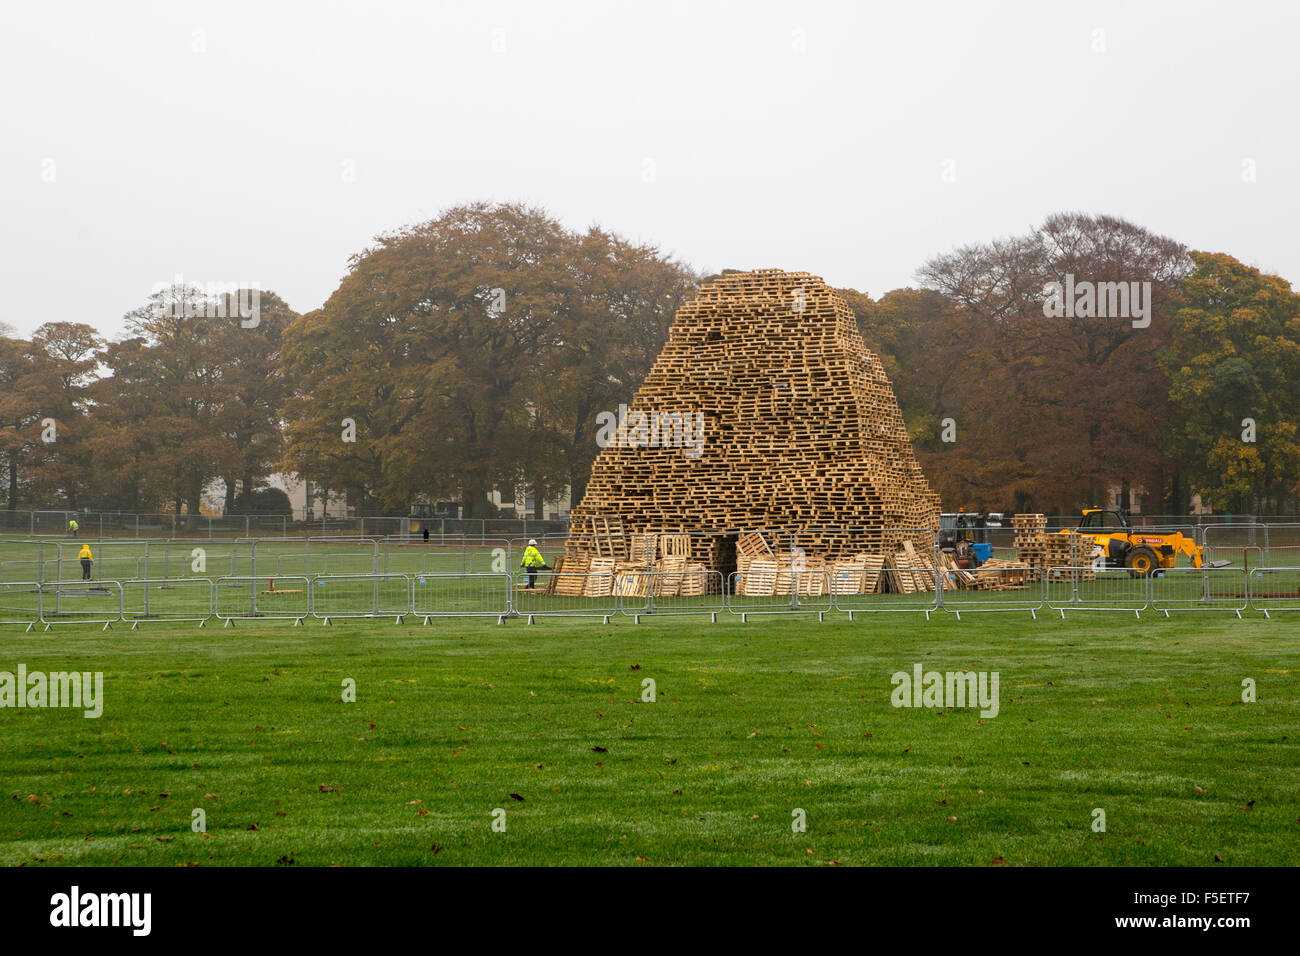 Leeds, UK. 3 November, 2015.  Workers finalise construction of the giant bonfire ready for large public fireworks display in Roundhay Park, Leeds. Credit:  James Copeland/Alamy Live News Stock Photo